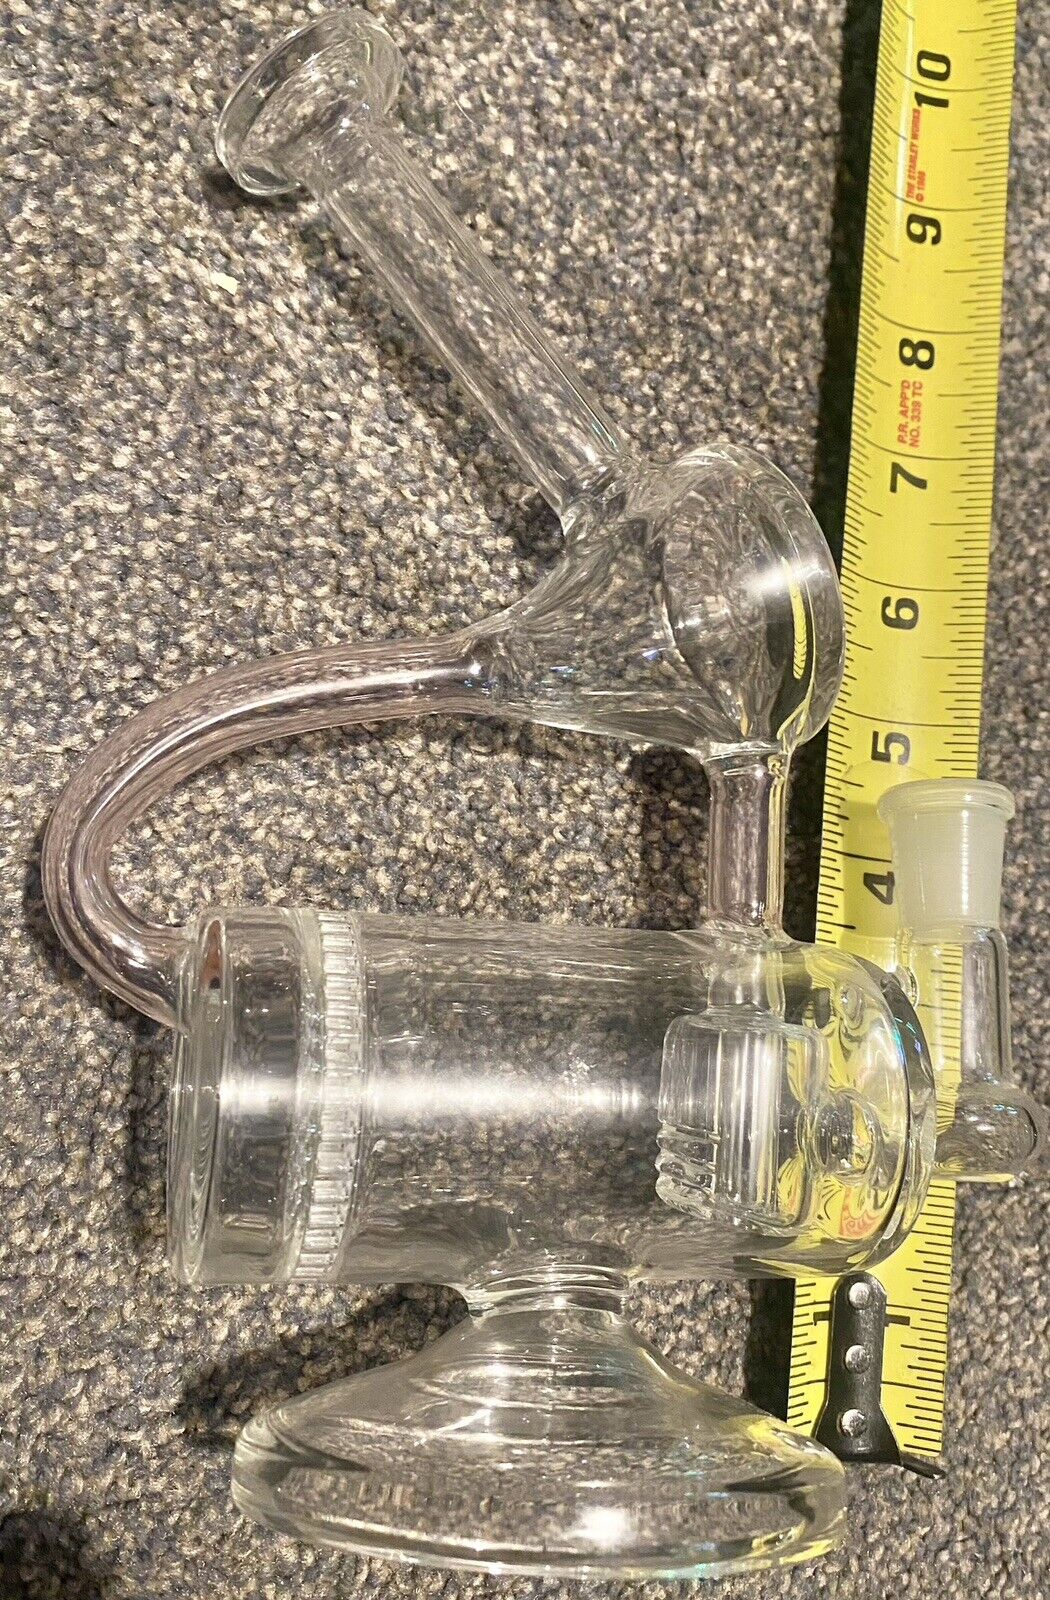 Pinkish Double Perc. Recy. Glass Bong. Available Now for 70.00